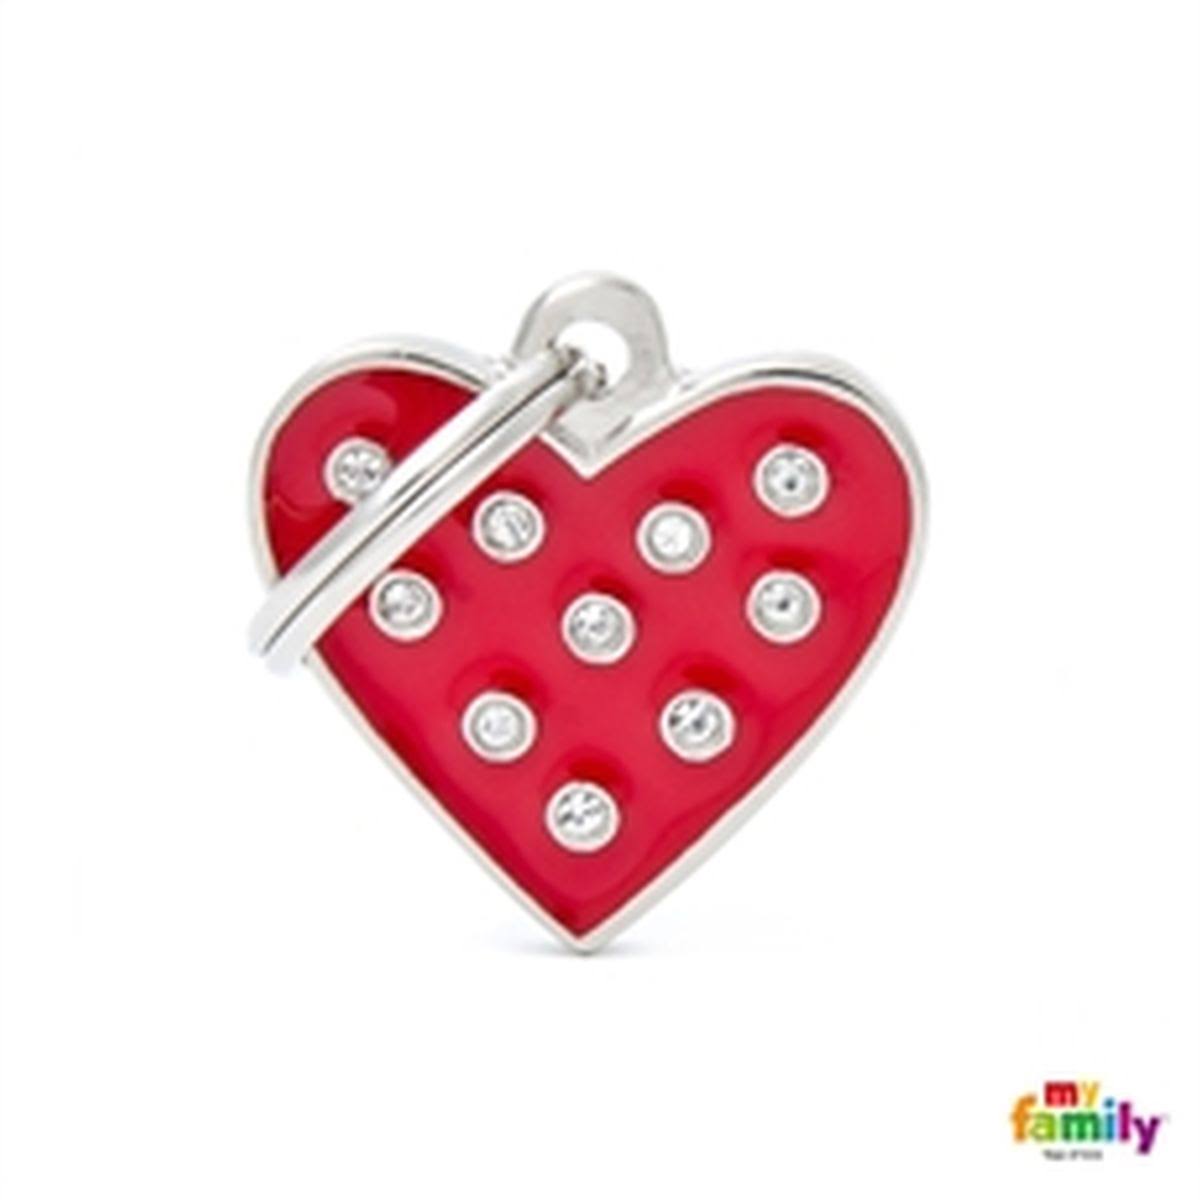 MyFamily Tag Red Heart Plate